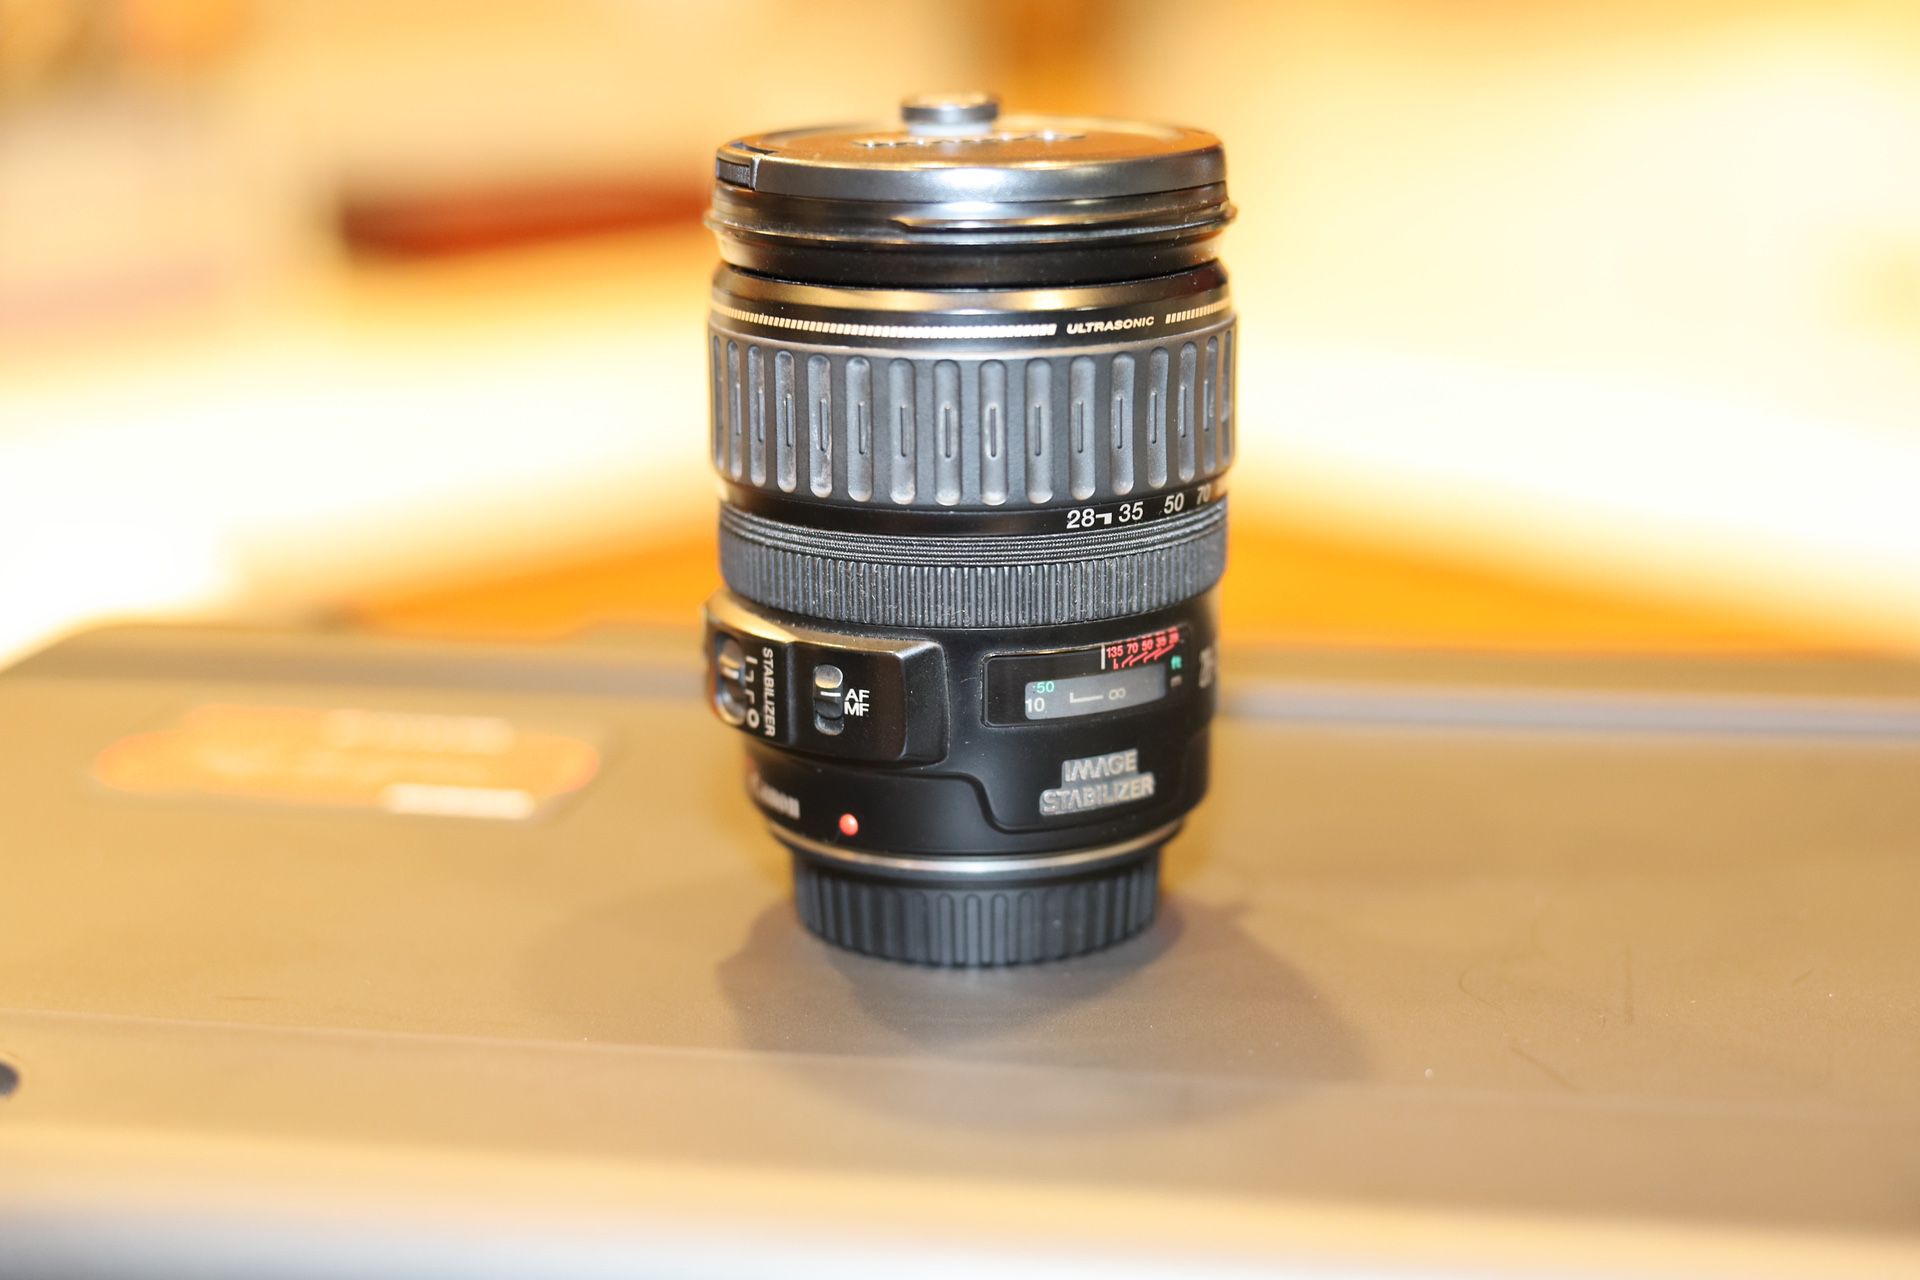 Canon EF 28-135mm f/3.5-5.6 IS USM